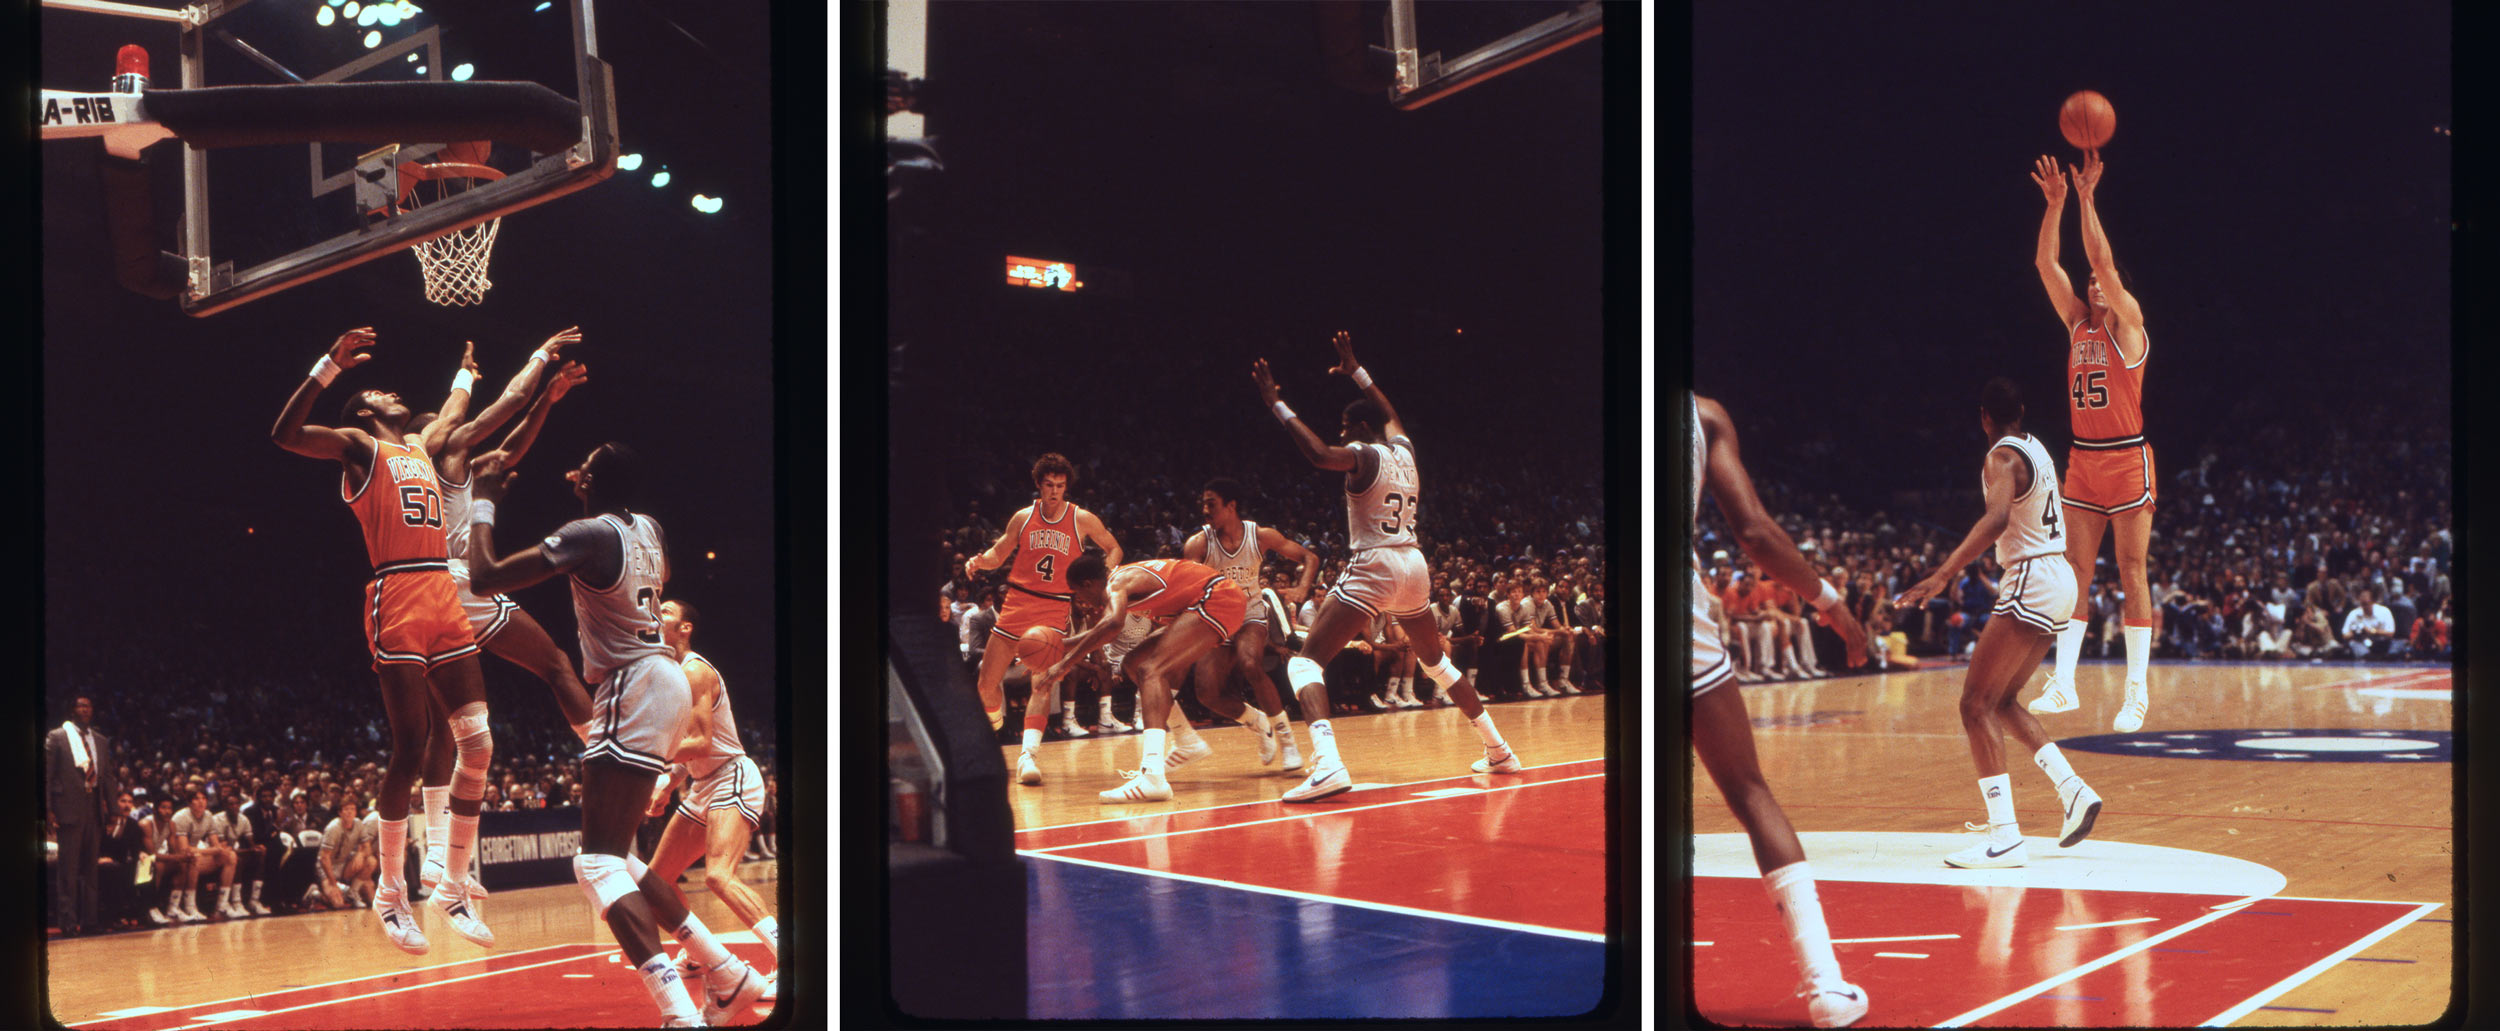 Three different images of Ralph Sampson playing basketball during a game